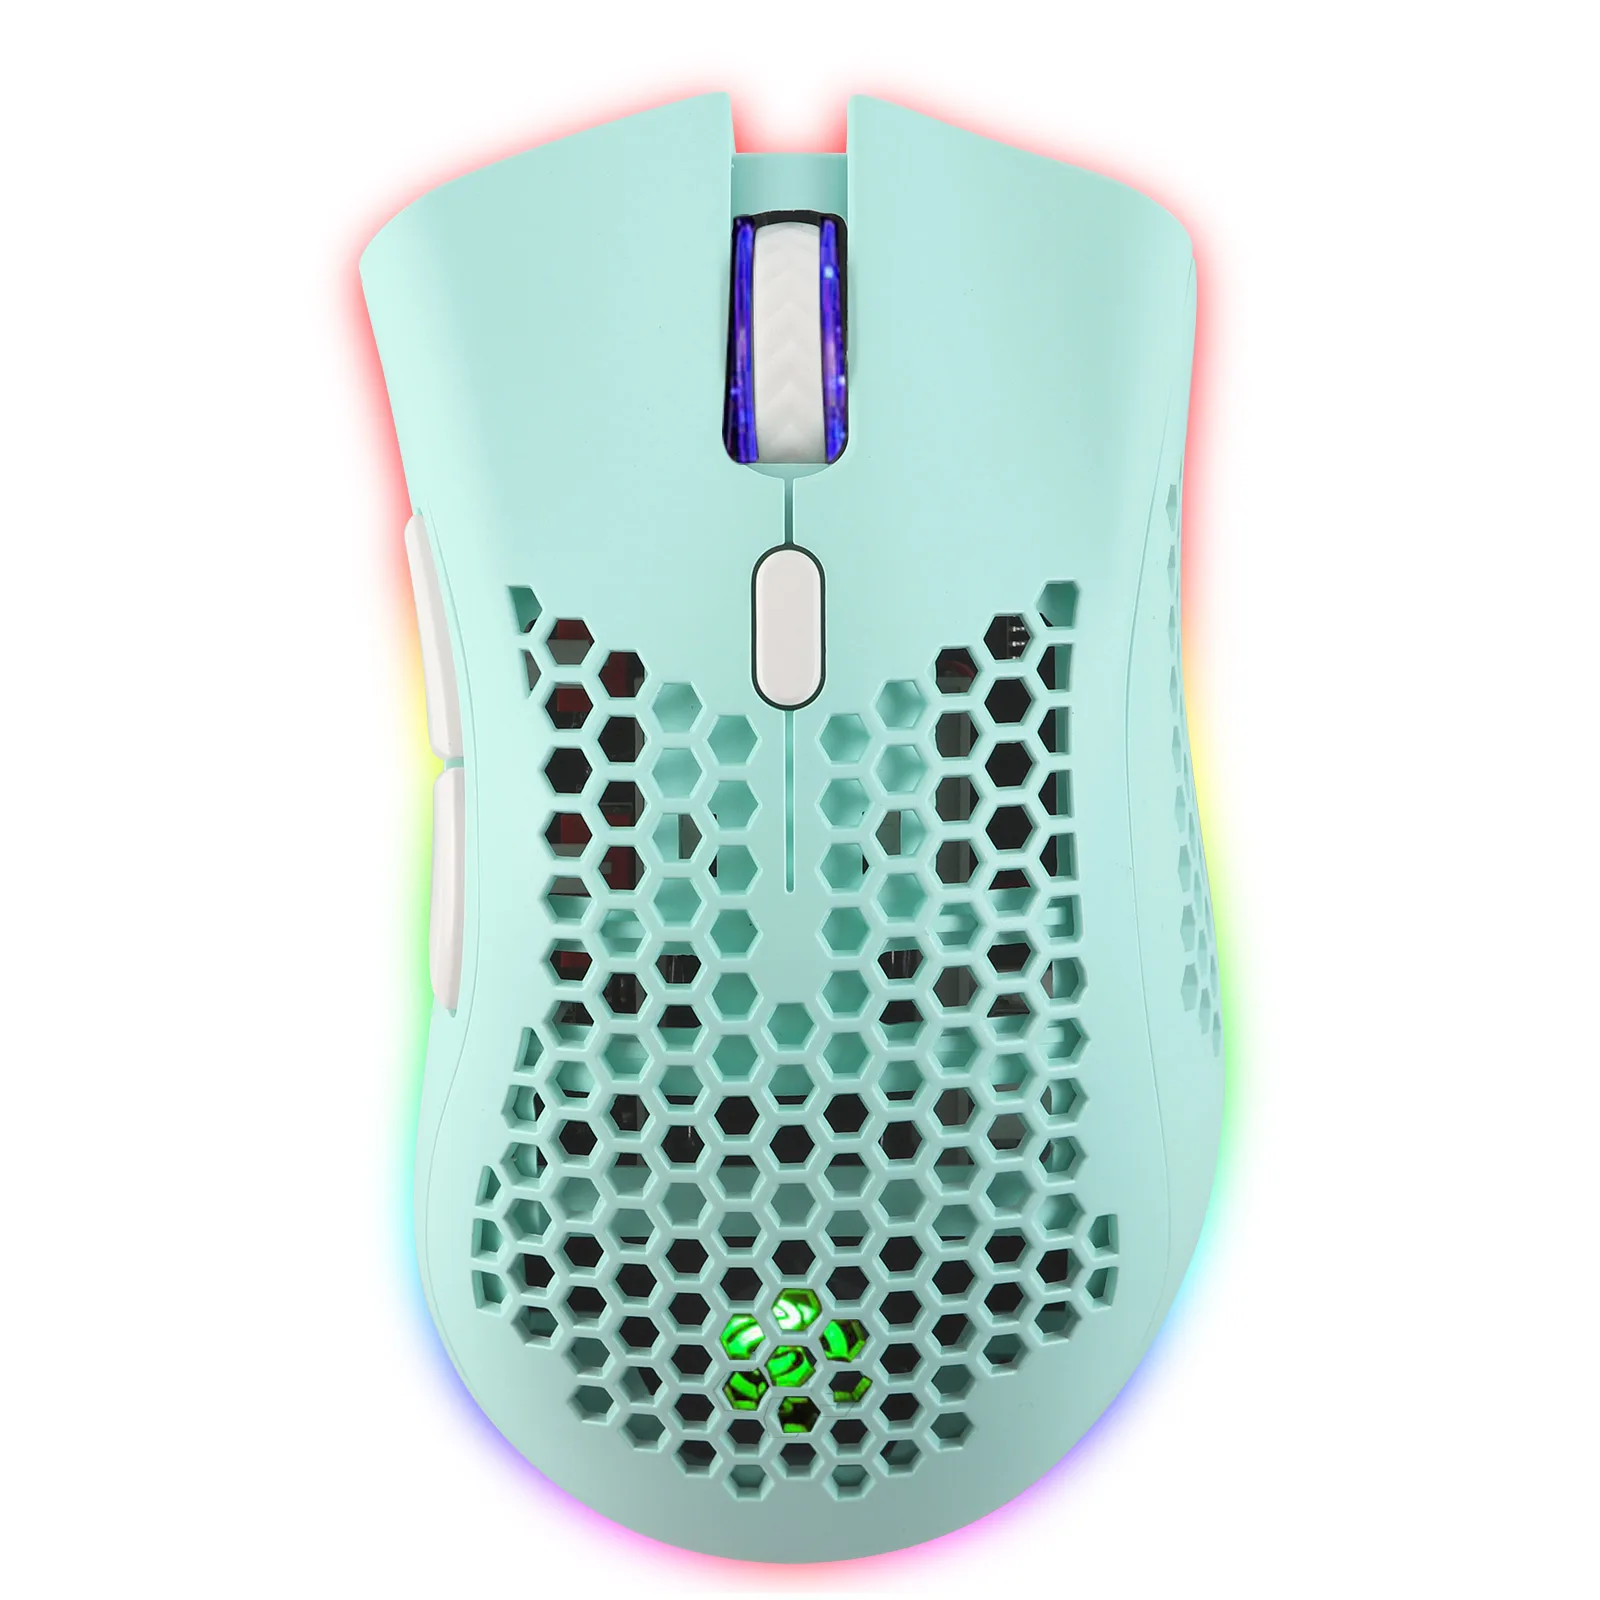 

Honeycomb Wireless Mouse RGB Backlit Gaming Mouse 3200DPI USB Optical Gamer Mice for Laptop PC